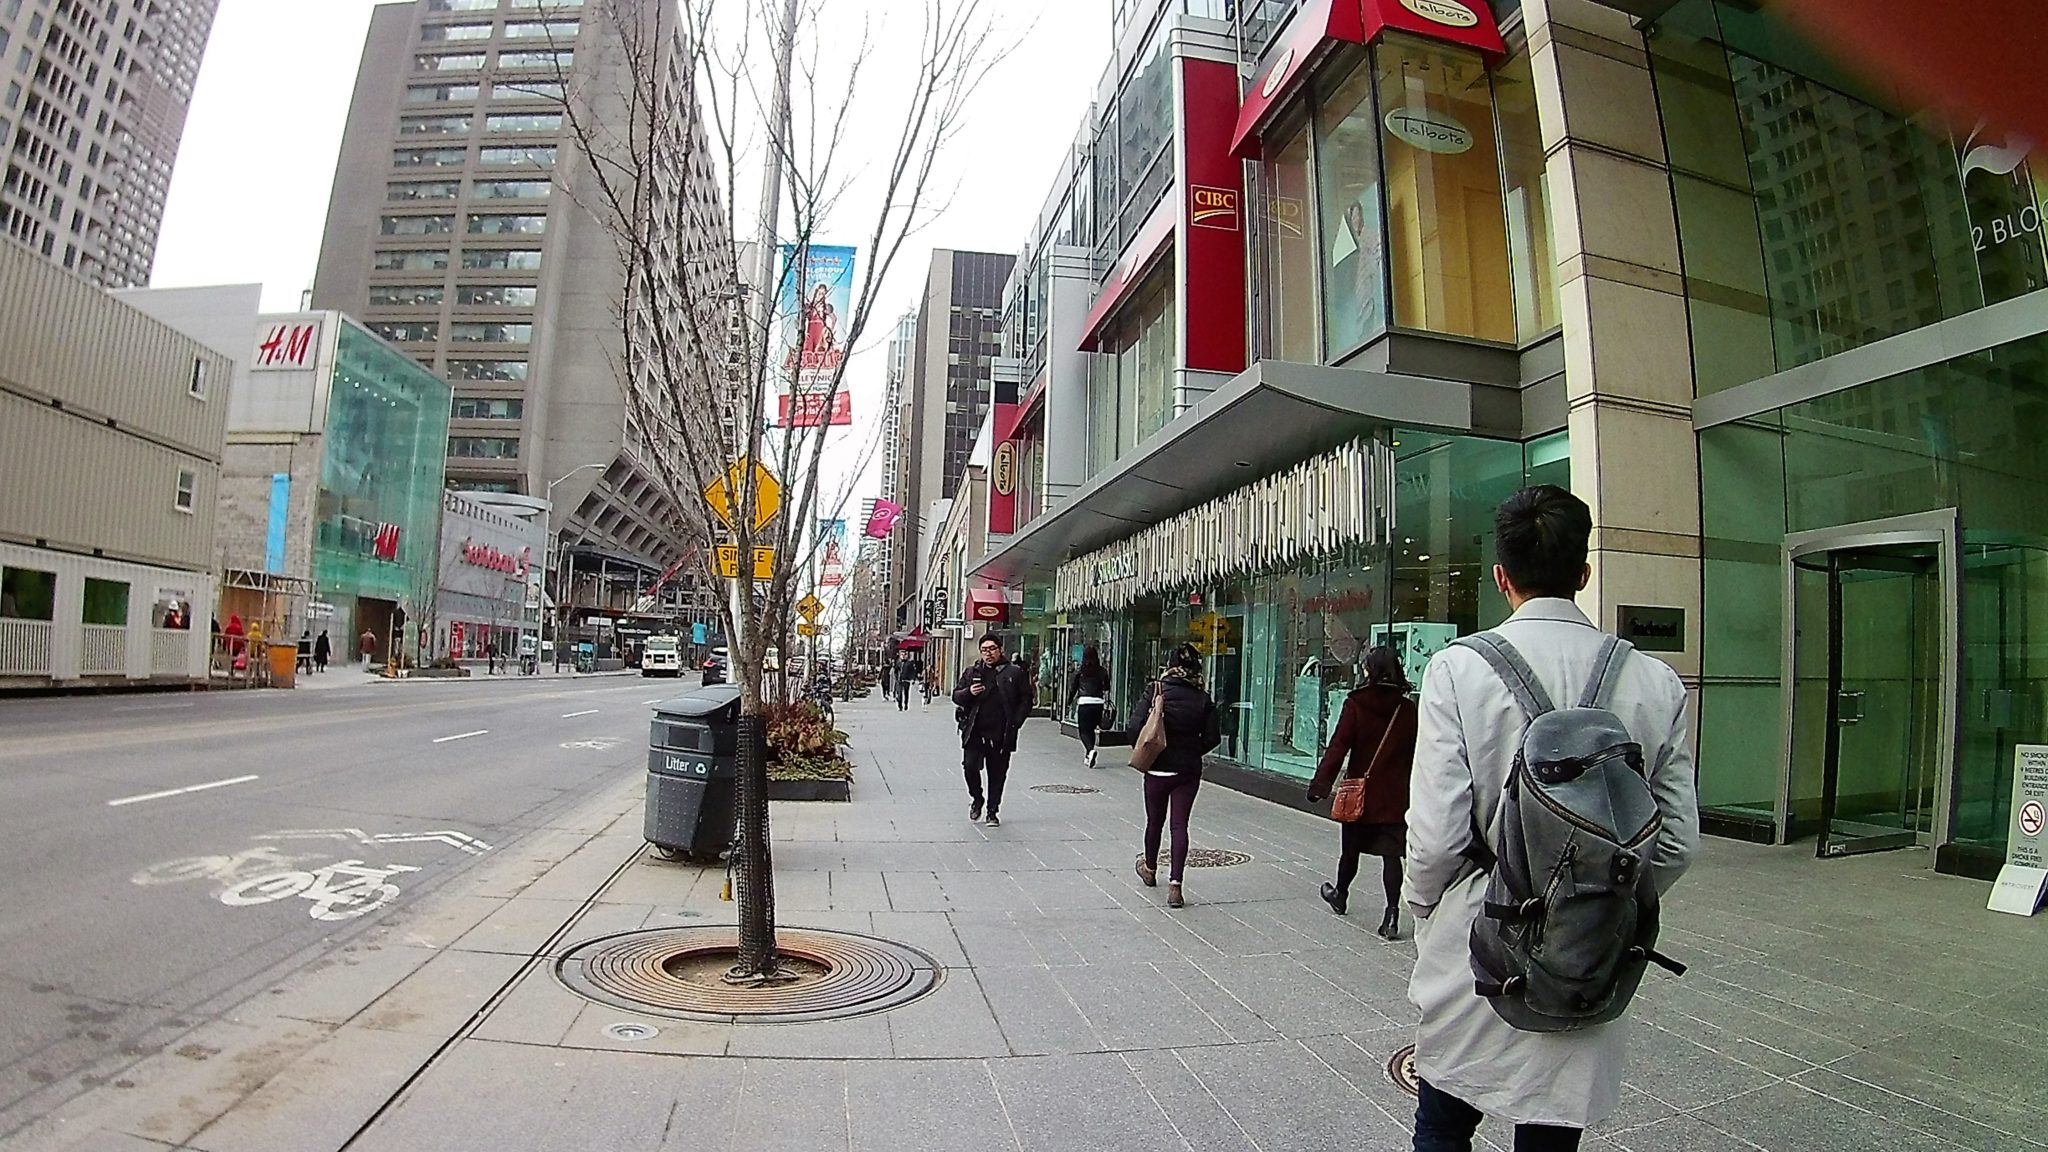 Photo of Bloor street showing people, banks, shops, and buildings.